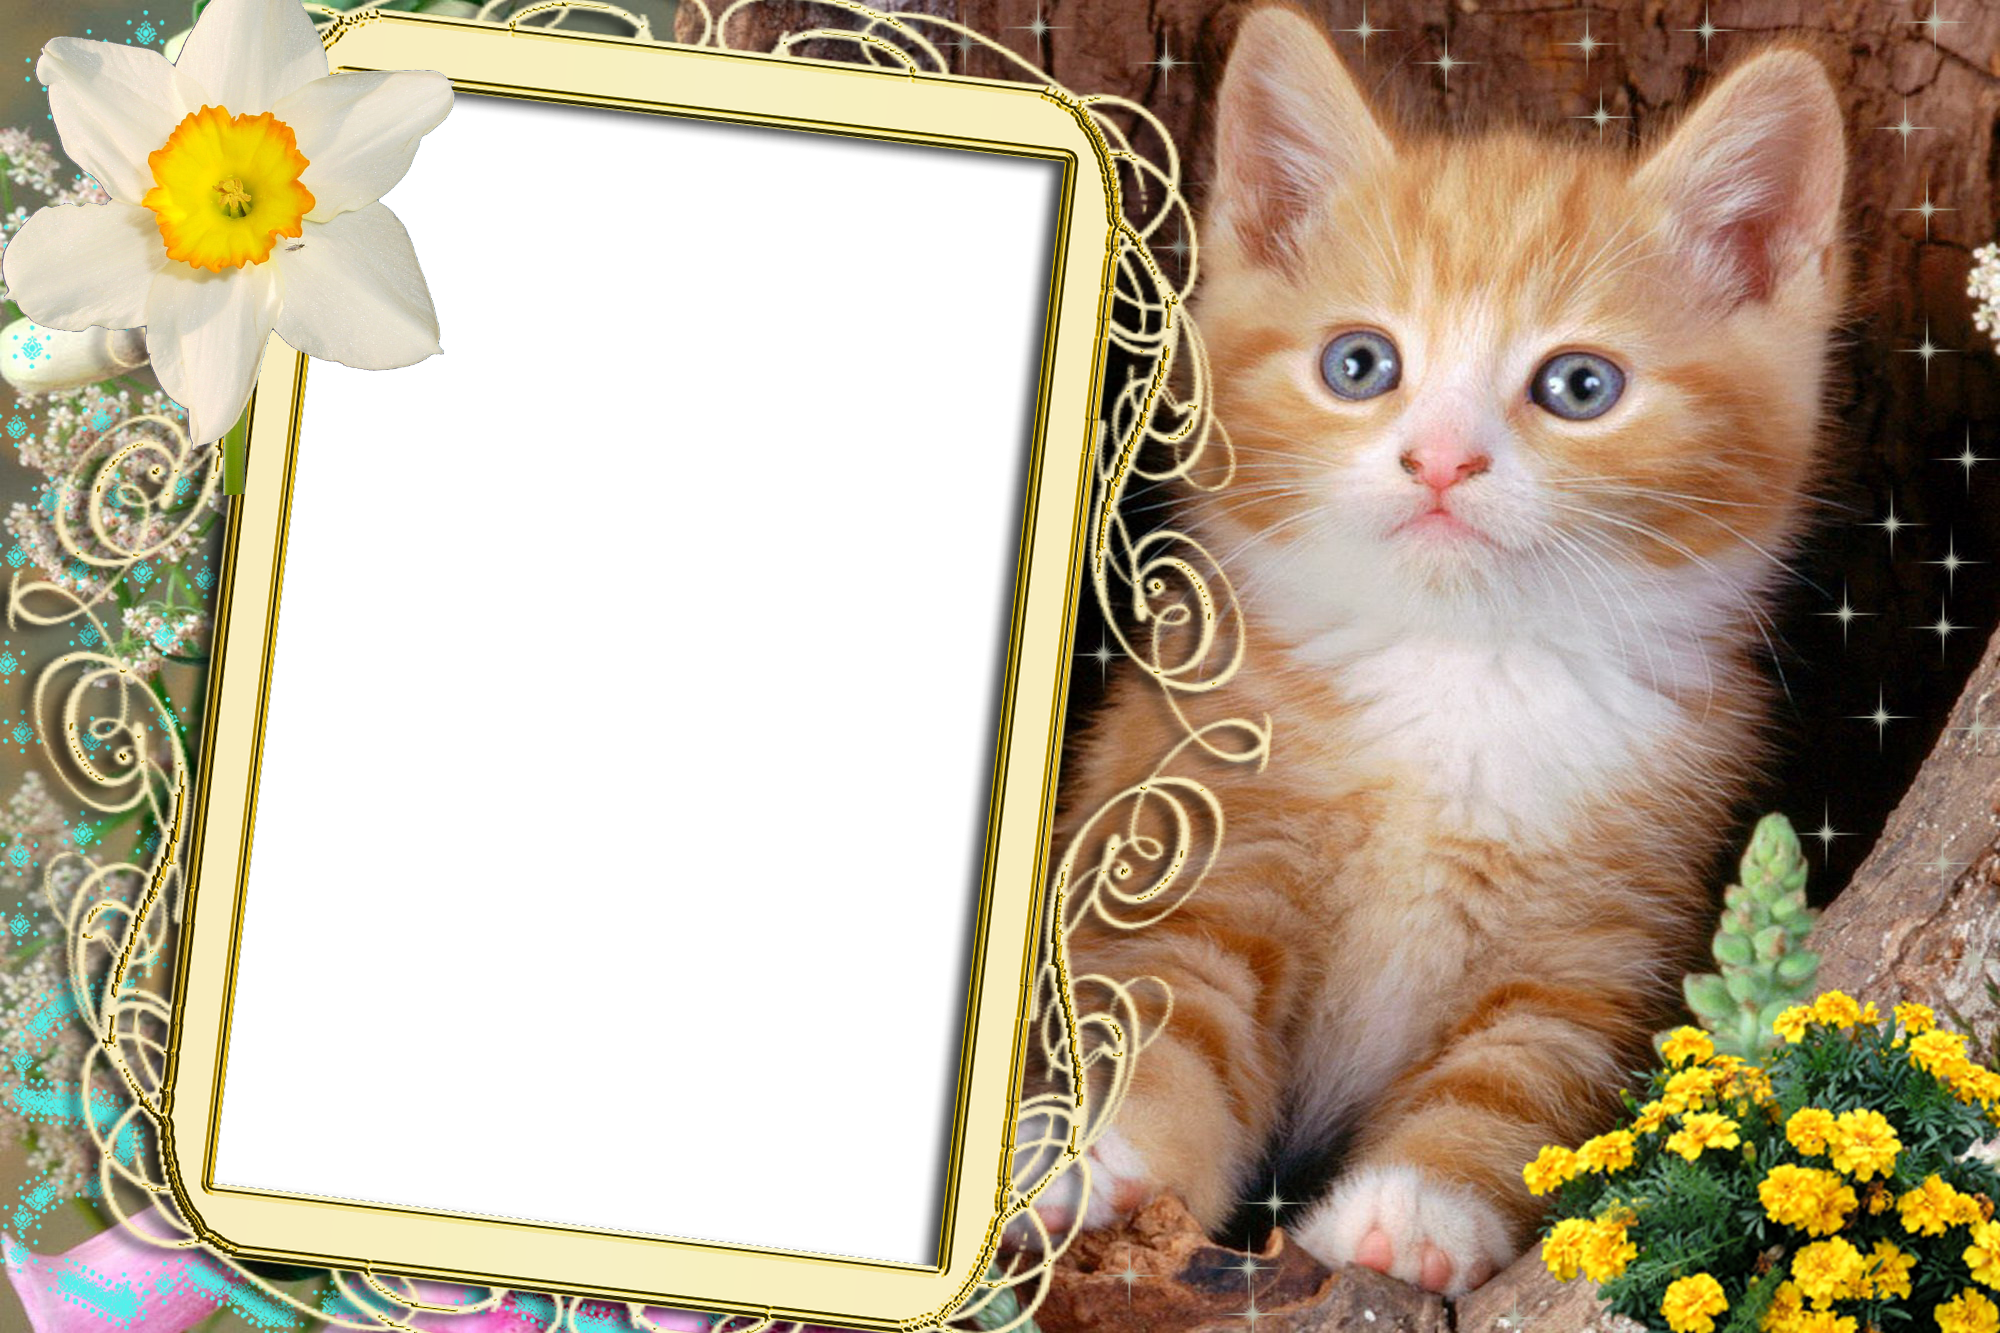 Kittens Frame Wallpapers High Quality | Download Free